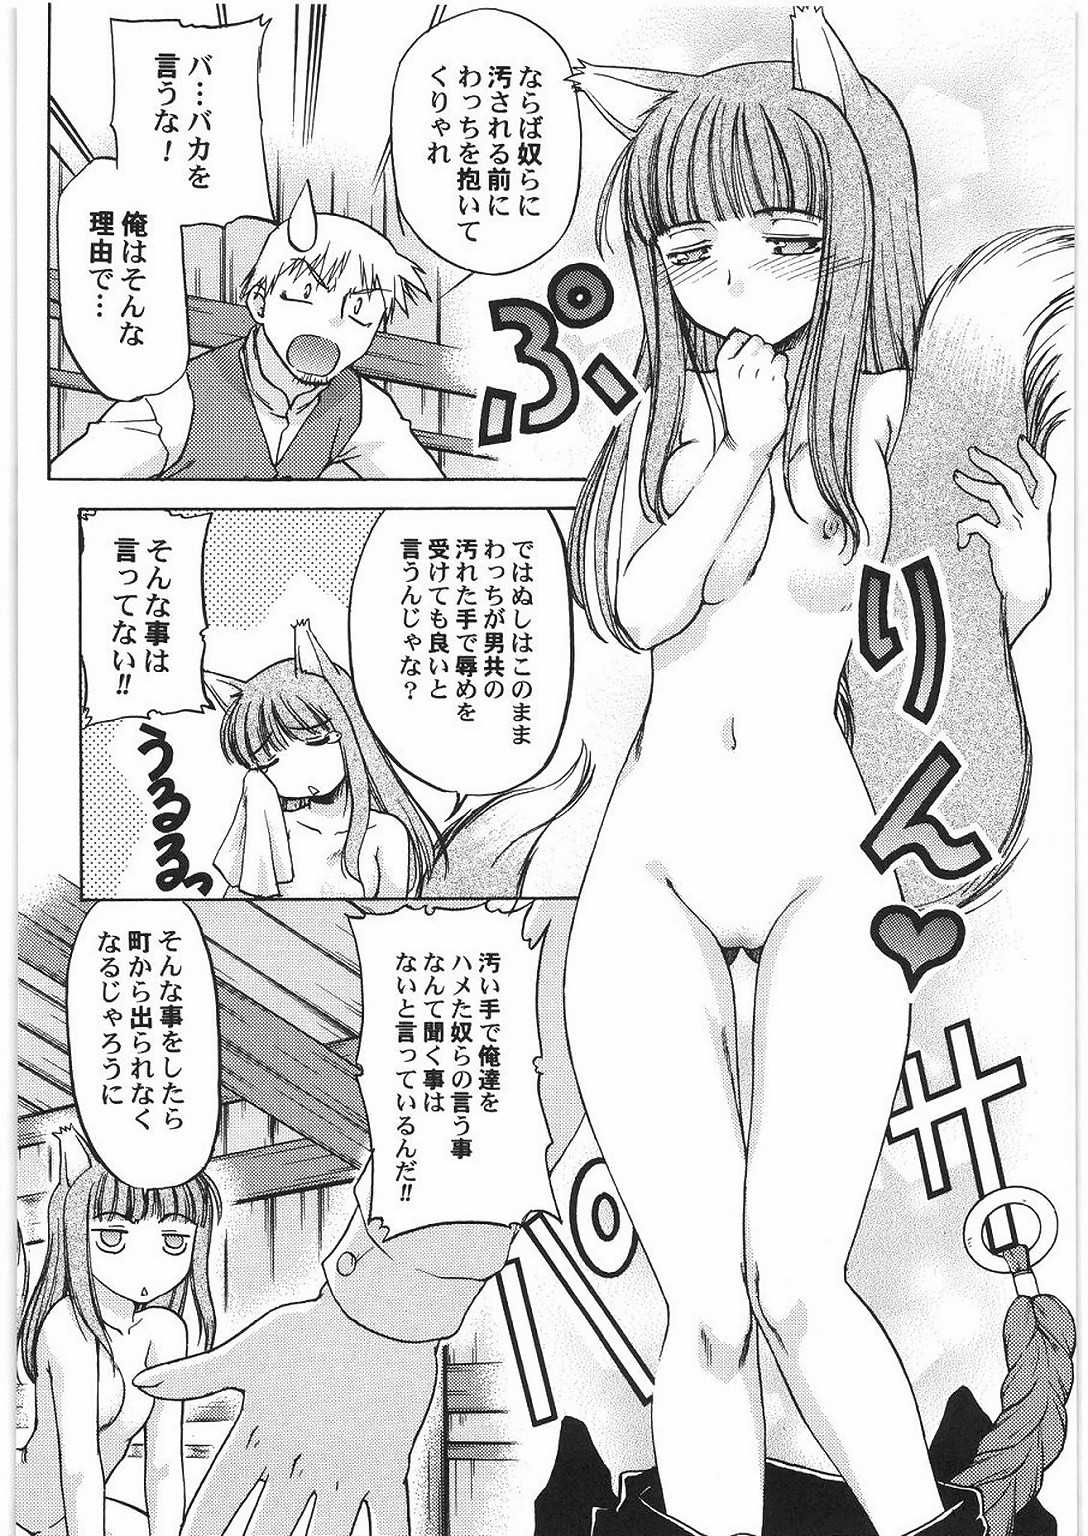 [Kacchuu Musume] Smalt Leather (Spice and Wolf) [甲冑娘] Smalt Leather (狼と香辛料)